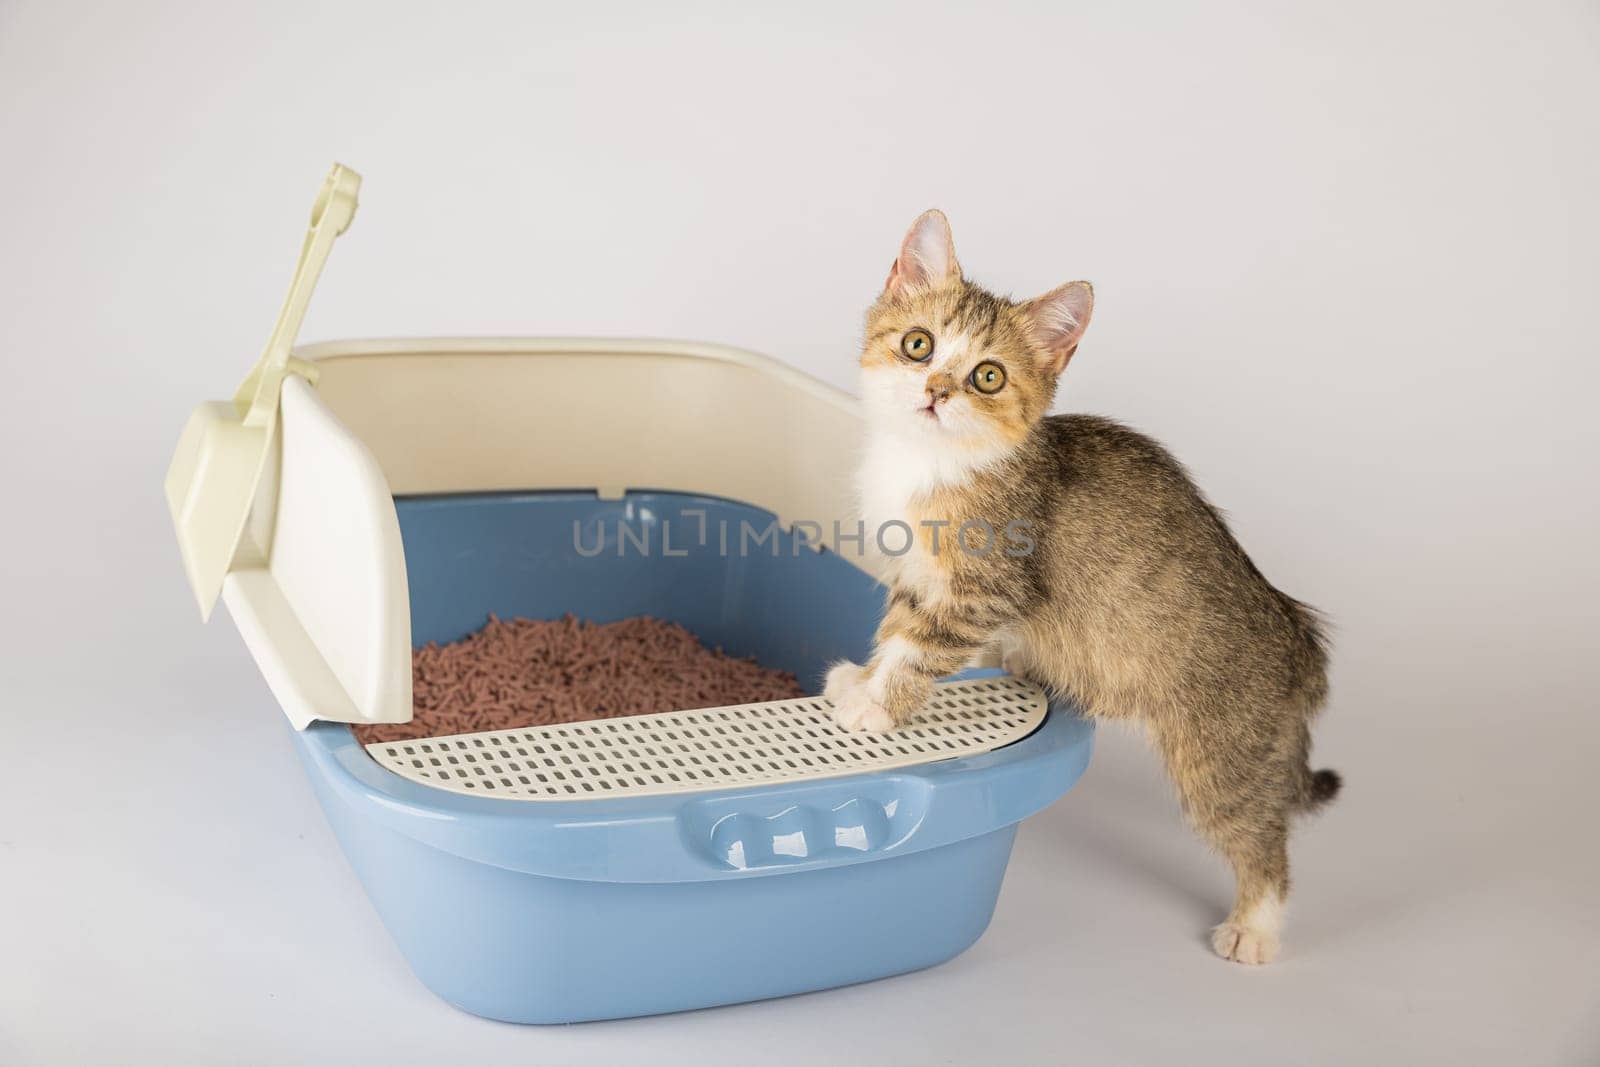 Isolated image showcases a cat in a litter box underscoring the significance of animal care and hygiene. The designated cat tray serves as the feline's toilet in this clean controlled environment. by Sorapop